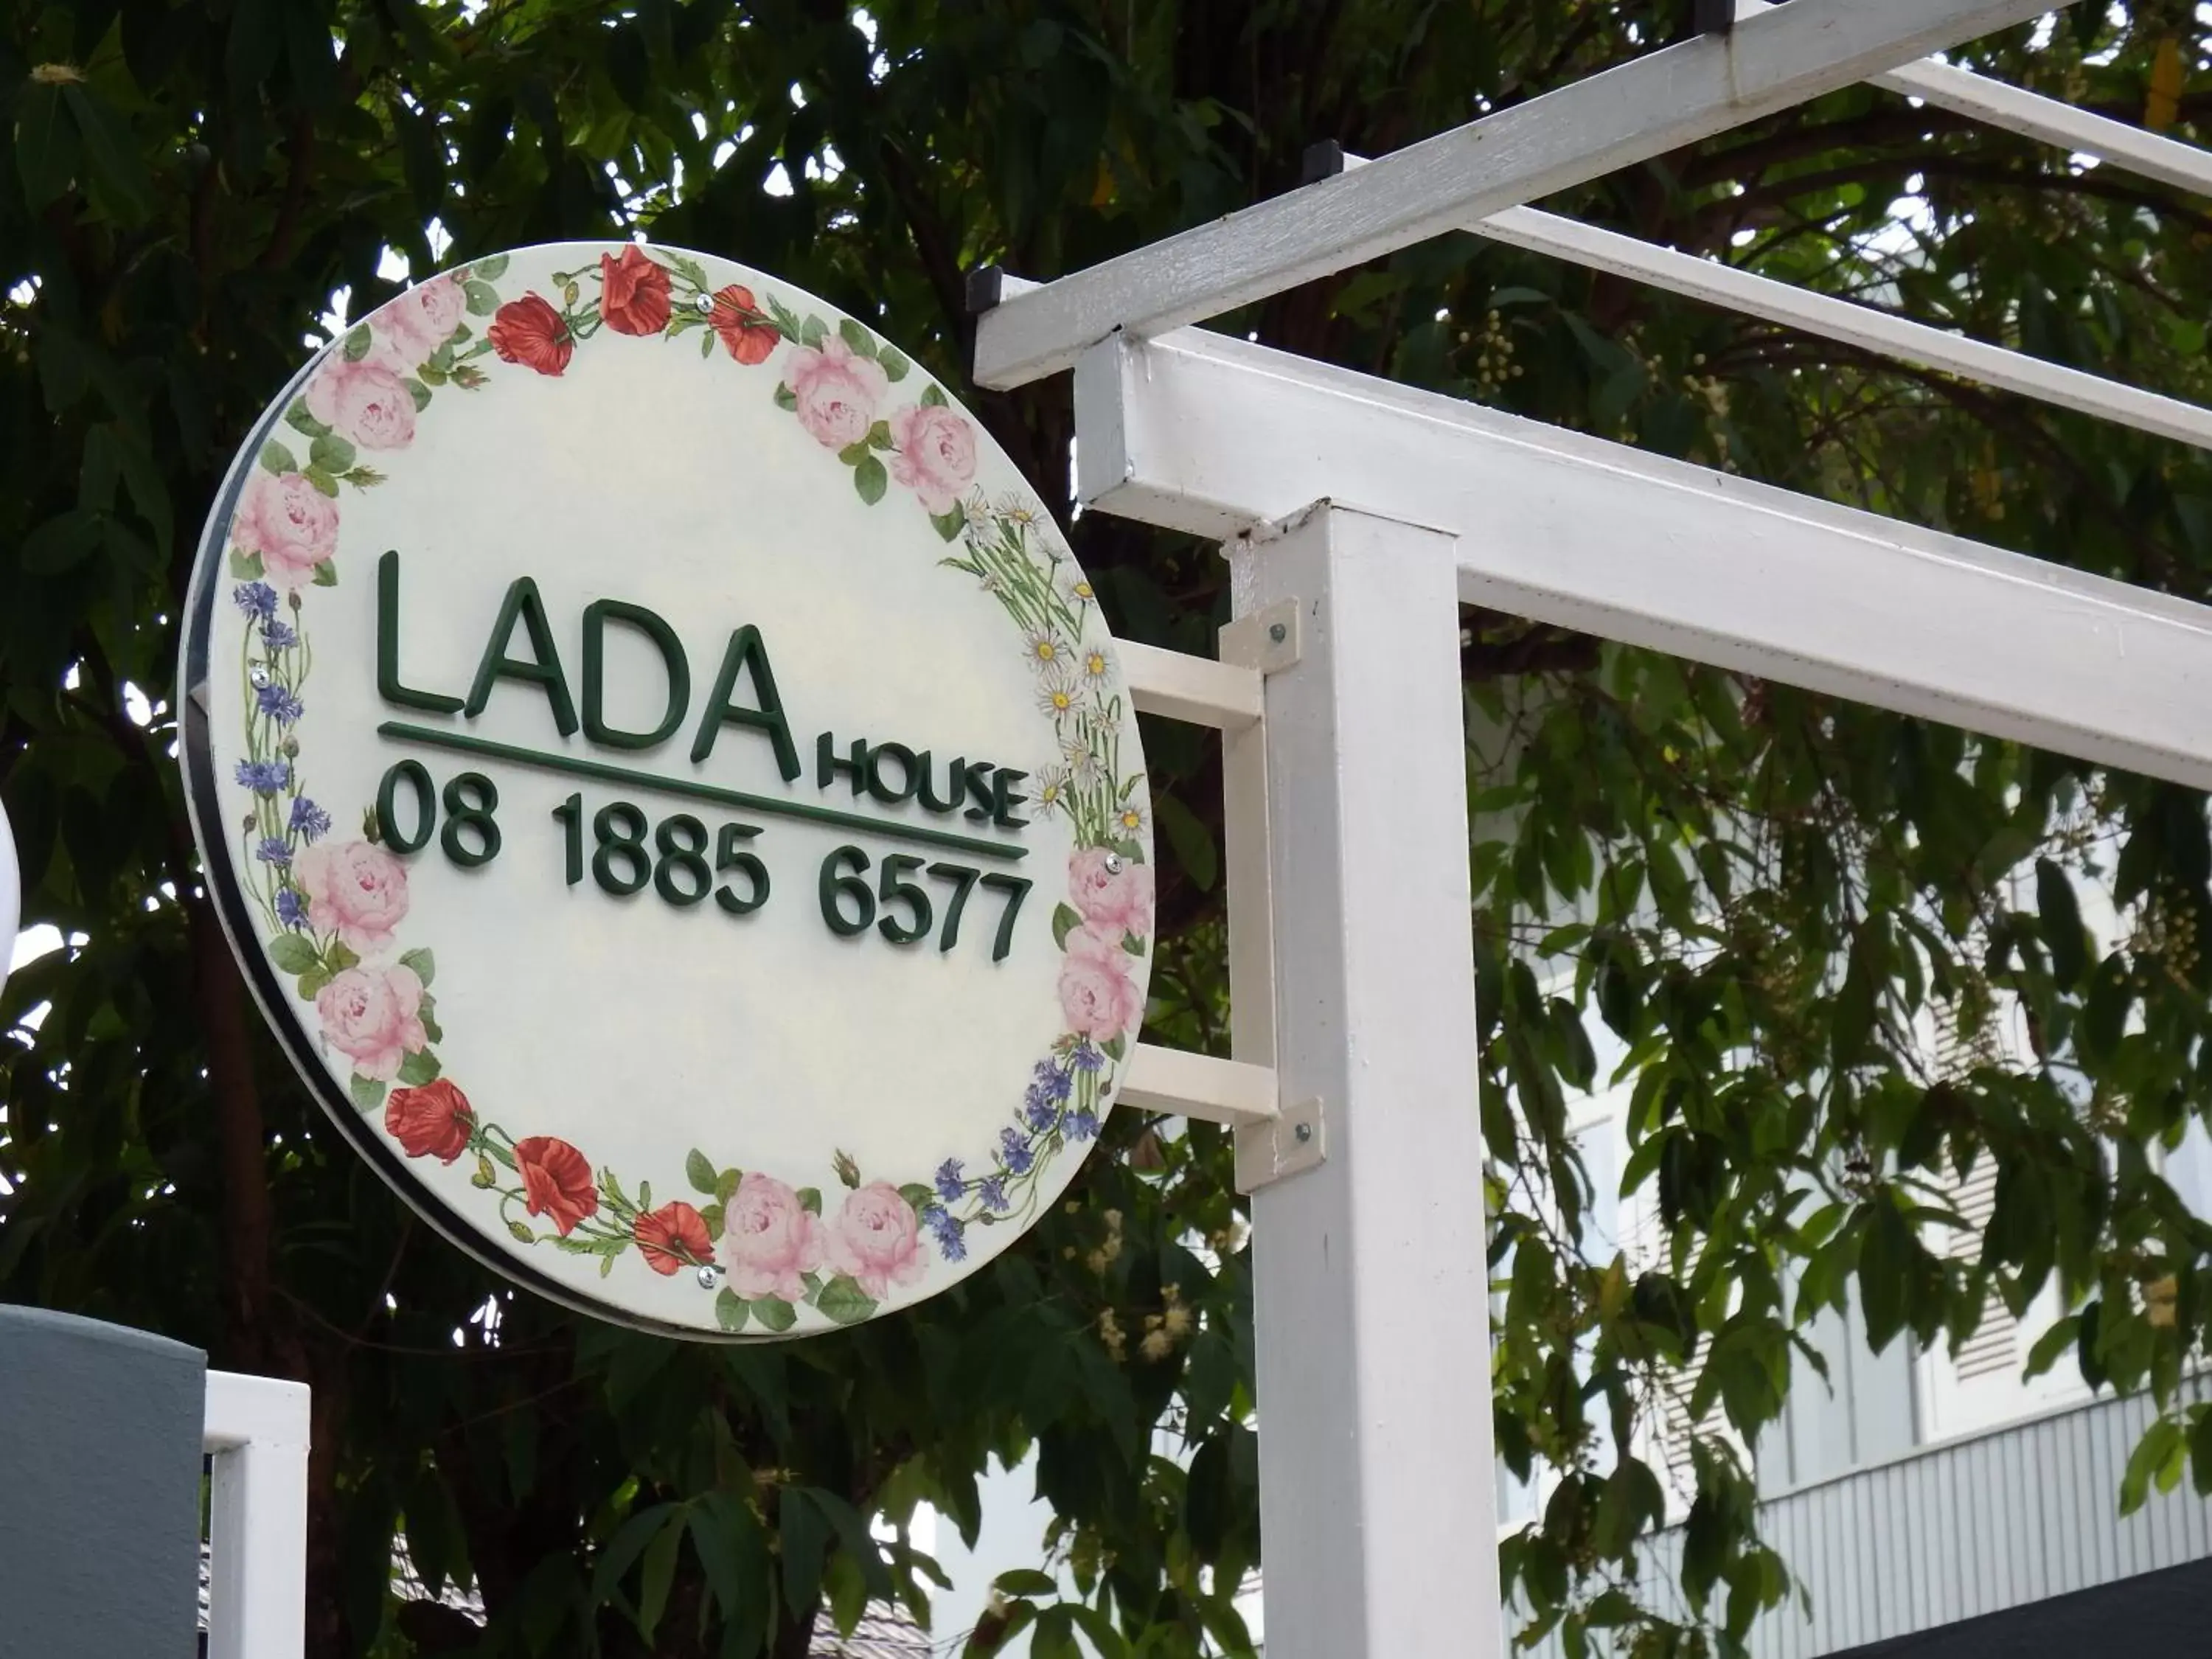 Property logo or sign in Lada House